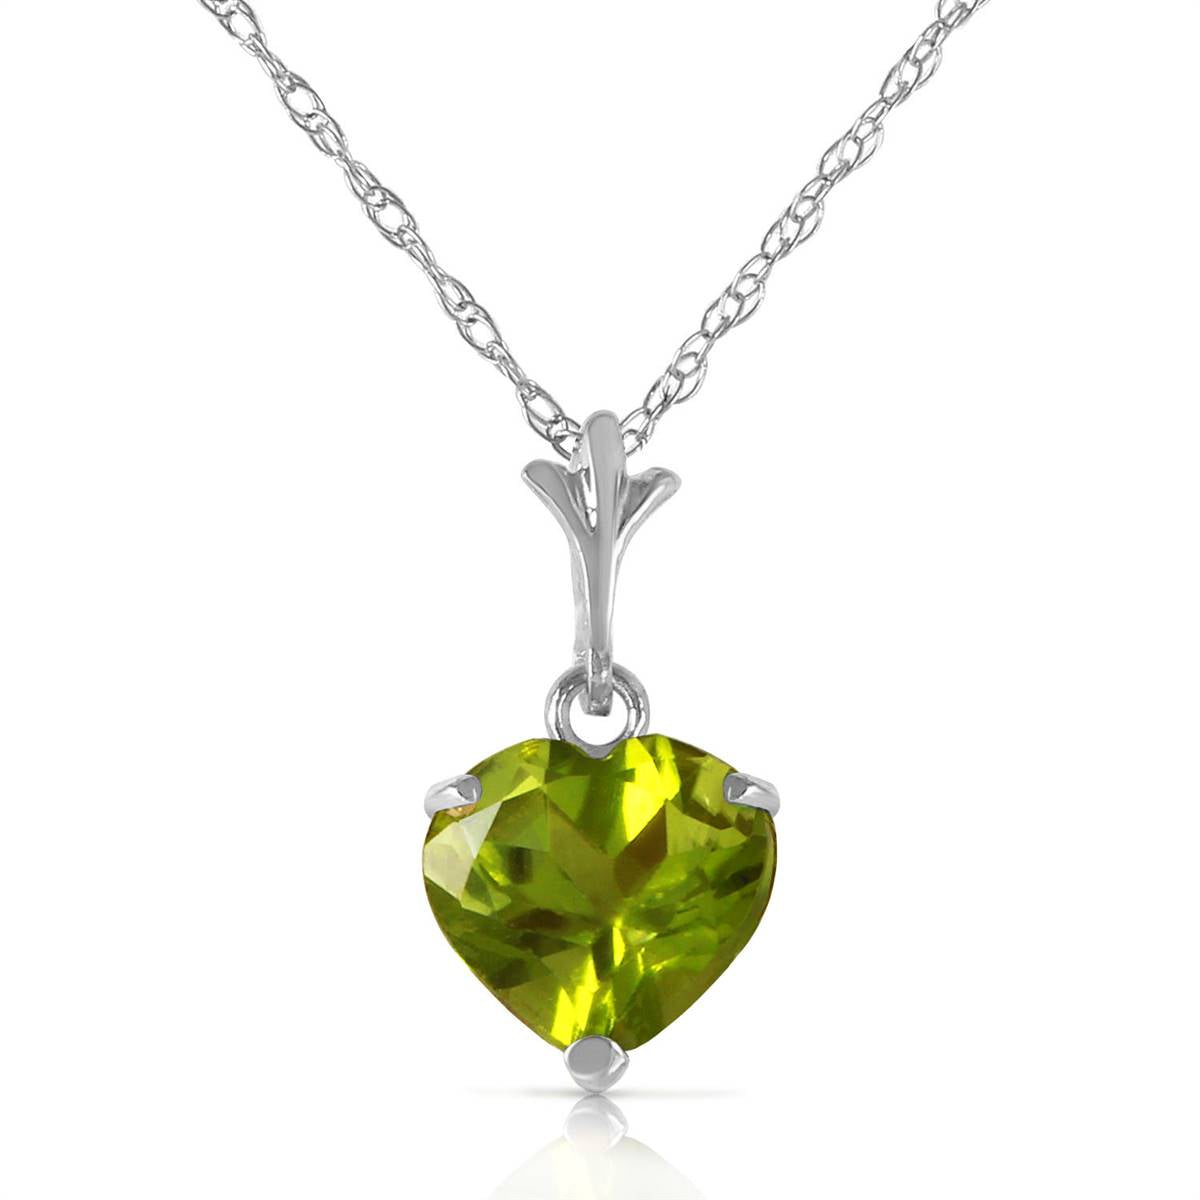 1.15 Carat 14K Solid White Gold Warmer Climate Peridot Necklace